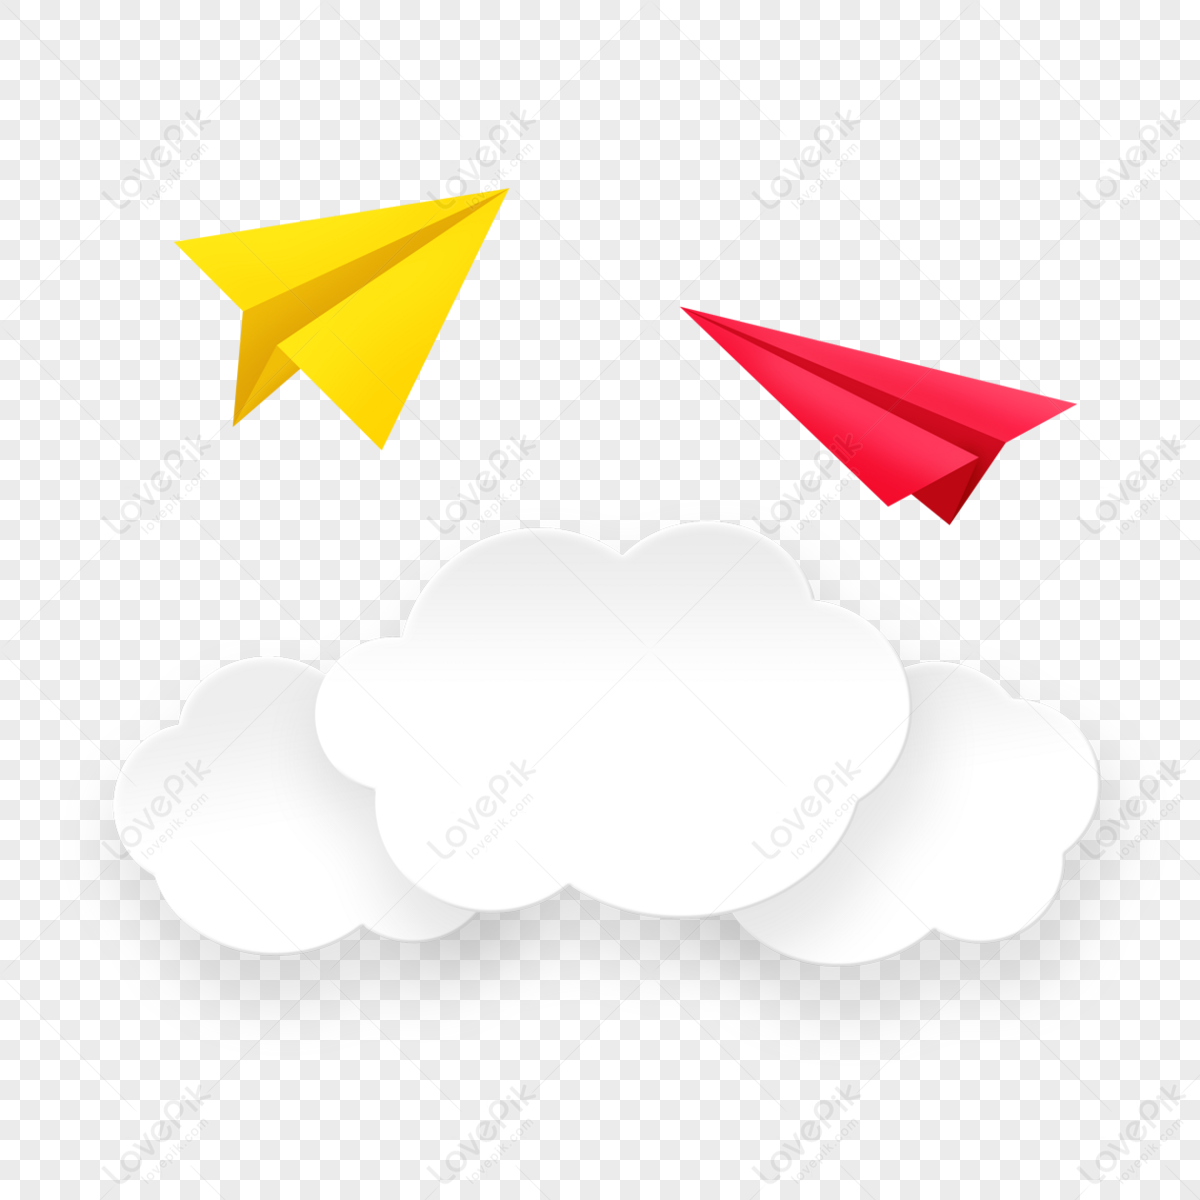 Cute beautiful white yellow red paper cut paper airplane decoration,voyage,cutting png image free download